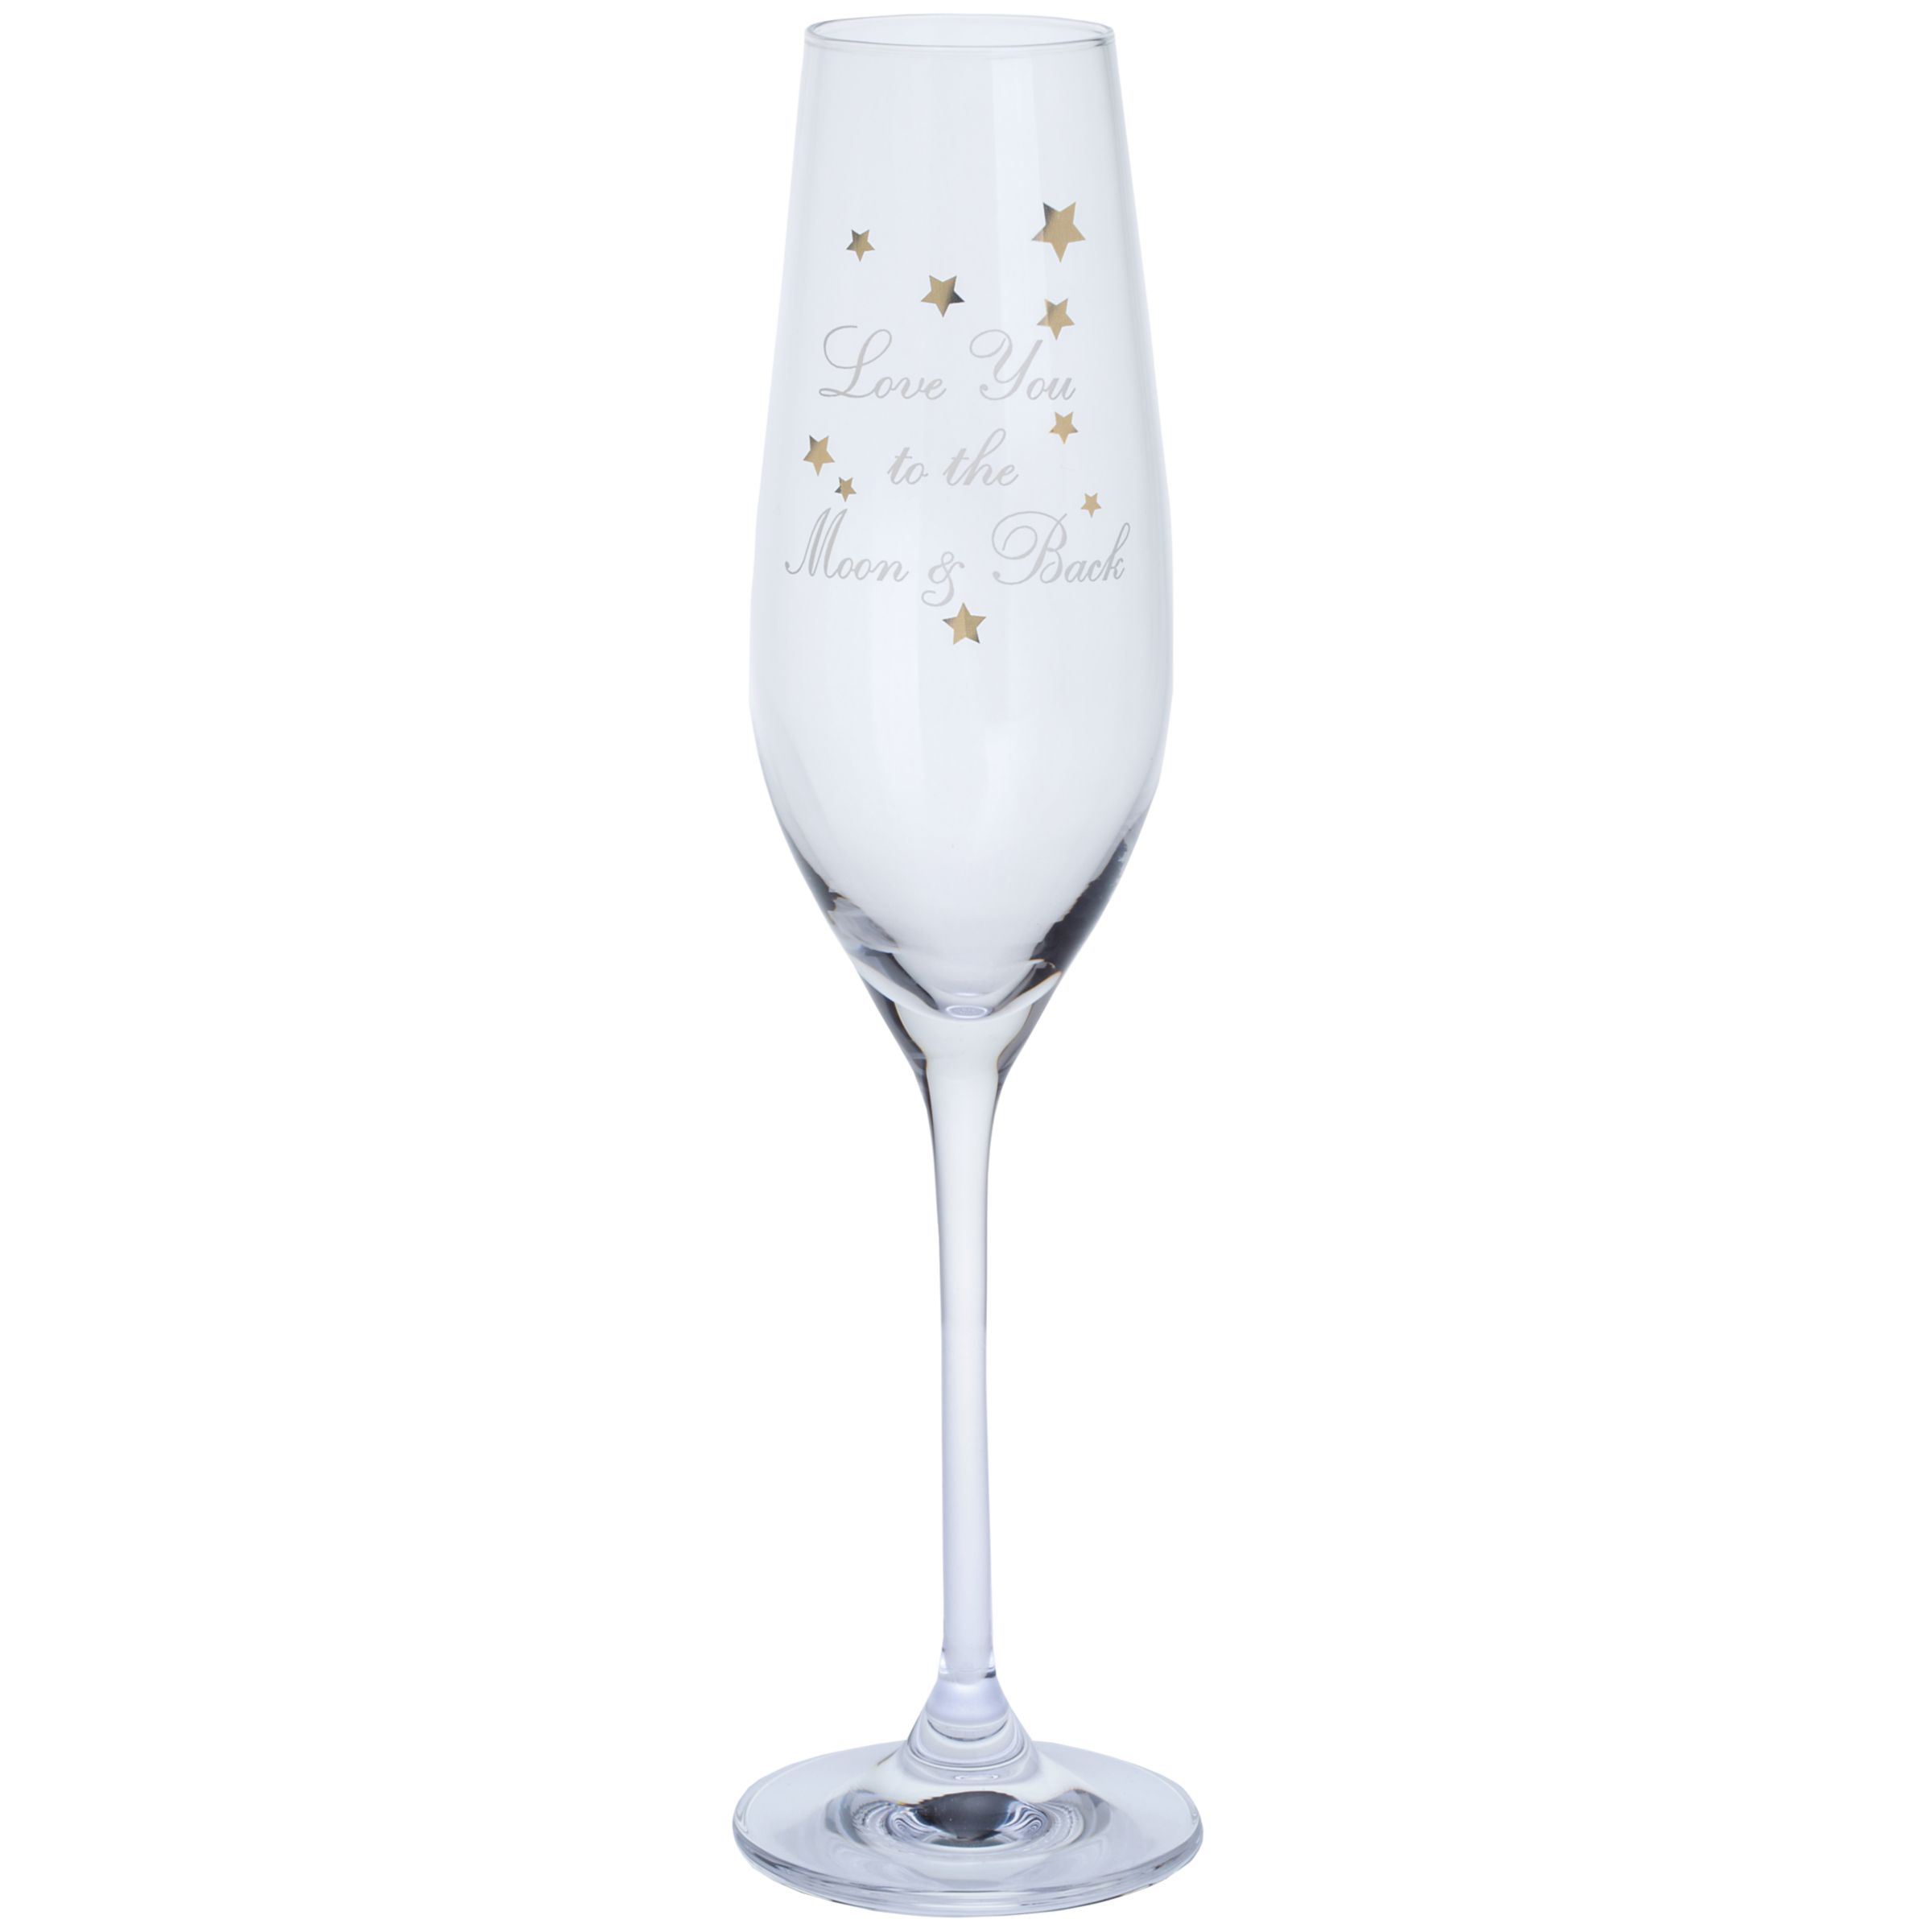 John Lewis & Partners Something Special  'Love You To The Moon & Back' Champagne Flute, 210ml